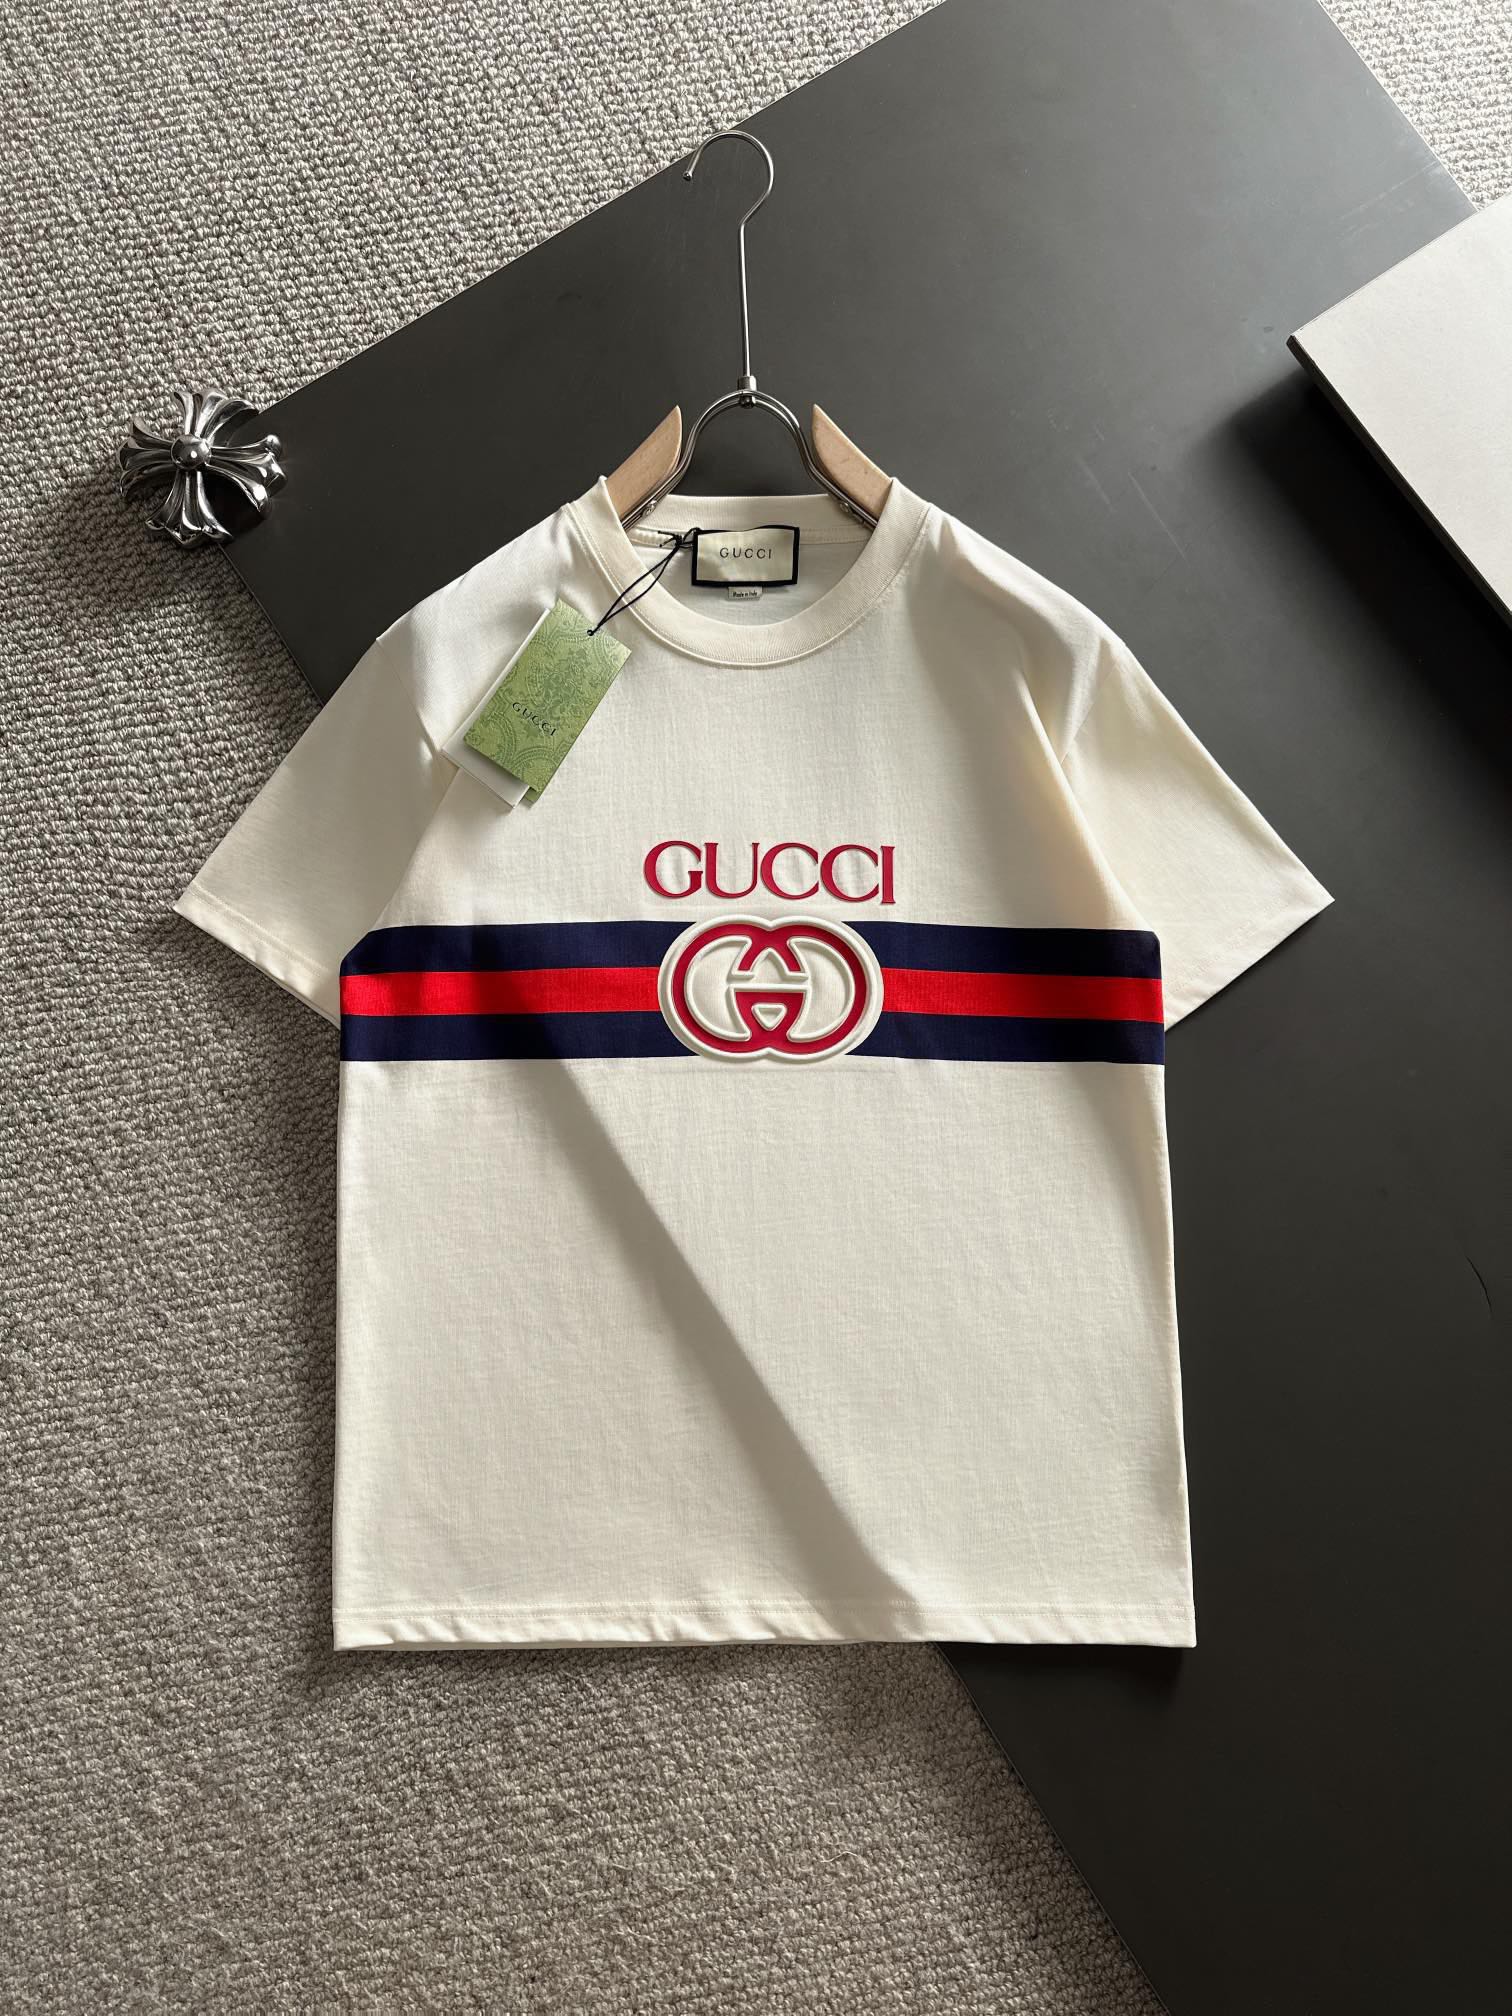 What’s best
 Gucci Clothing T-Shirt High Quality Customize
 Beige Black Printing Unisex Spring Collection Short Sleeve